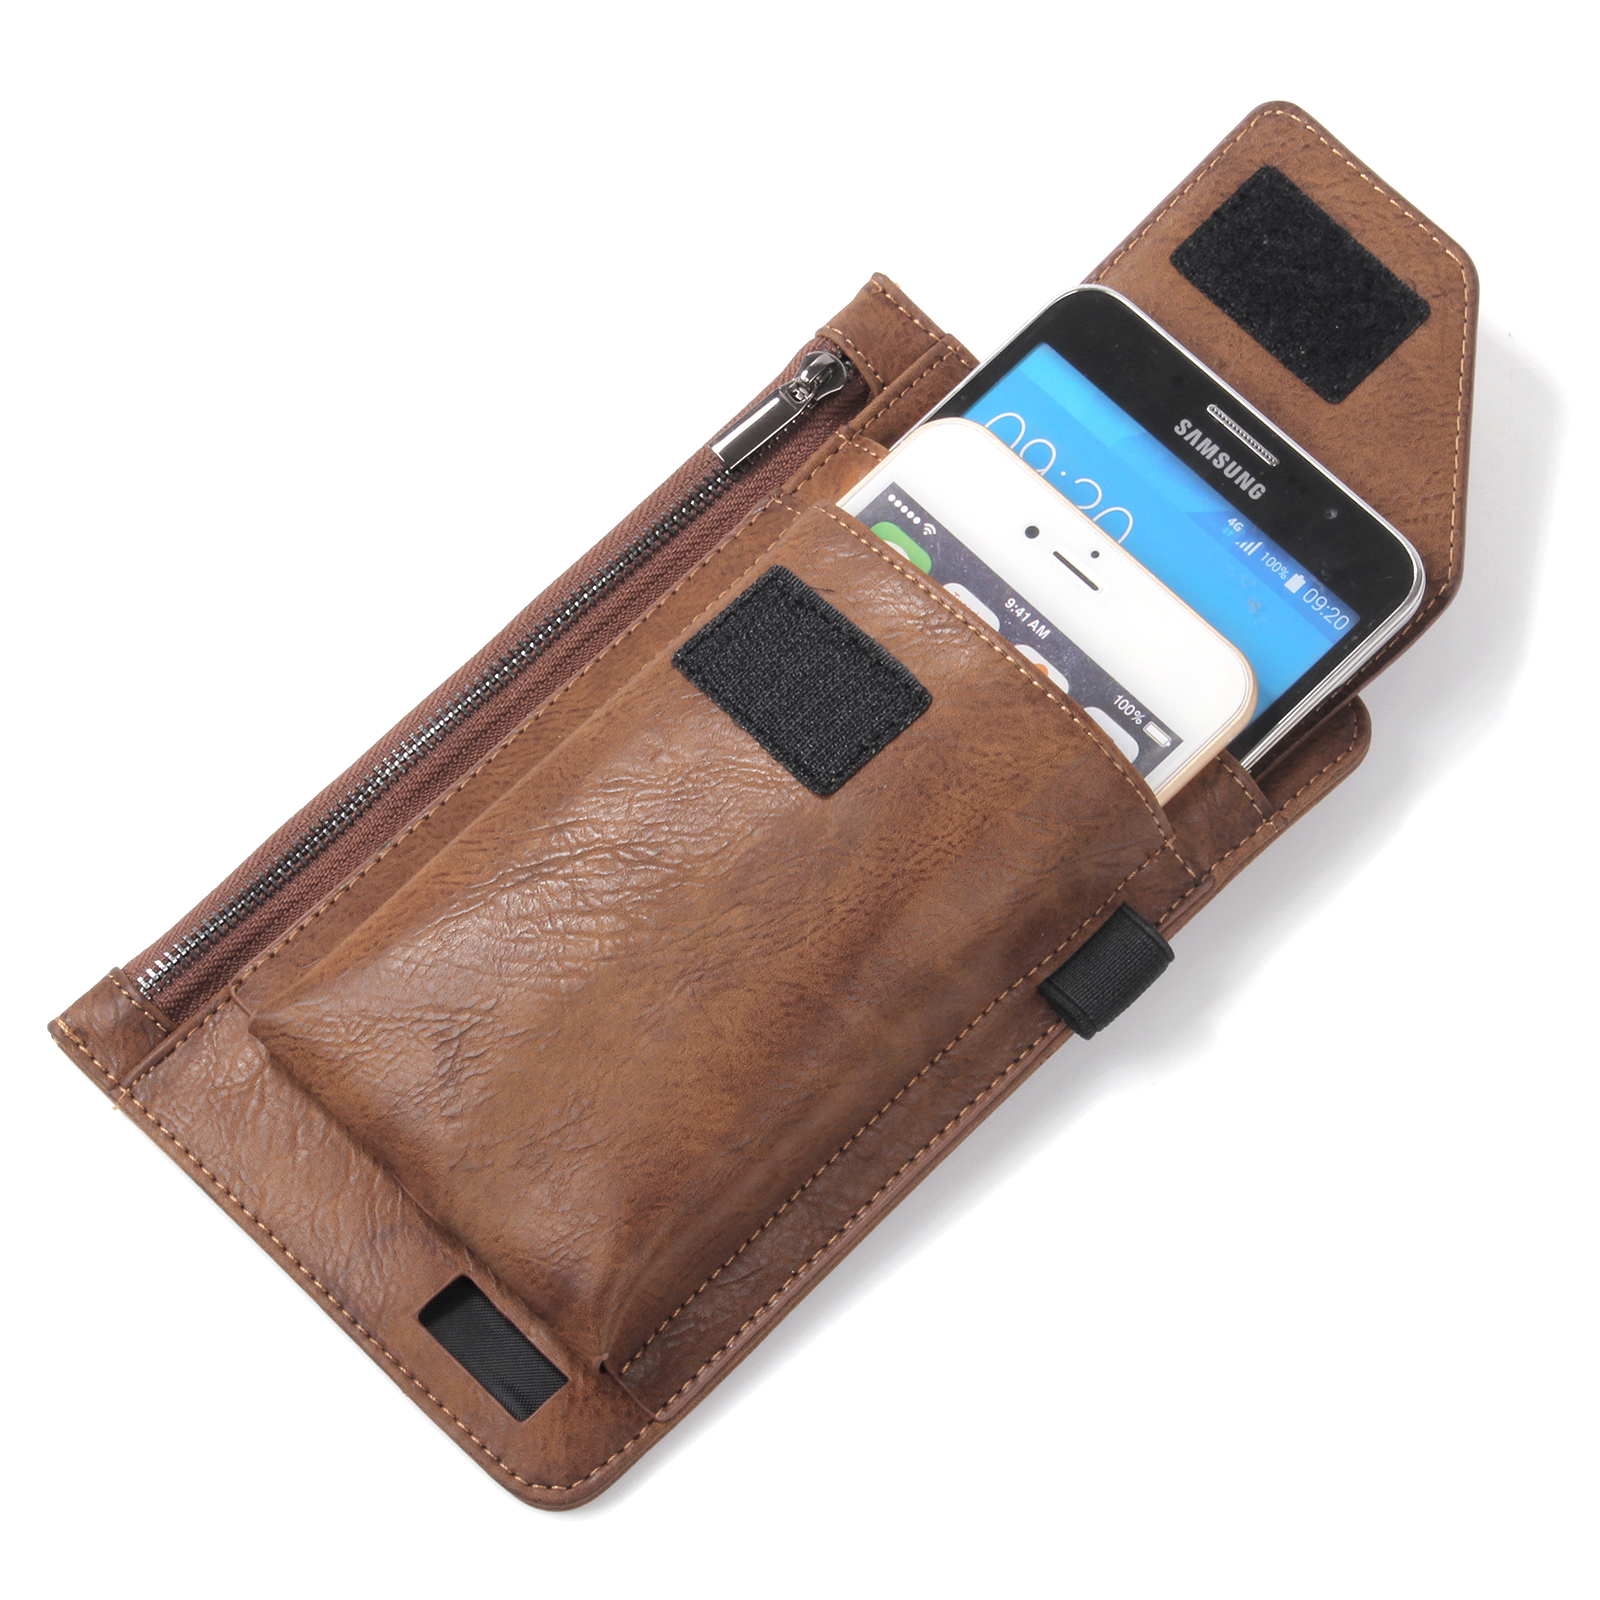 Bakeey-Casual-Vintage-Bussiness-Multi-Pocket-Reserve-Charging-Port-PU-Leather-Mobile-Phone-Money-Hik-1692248-4